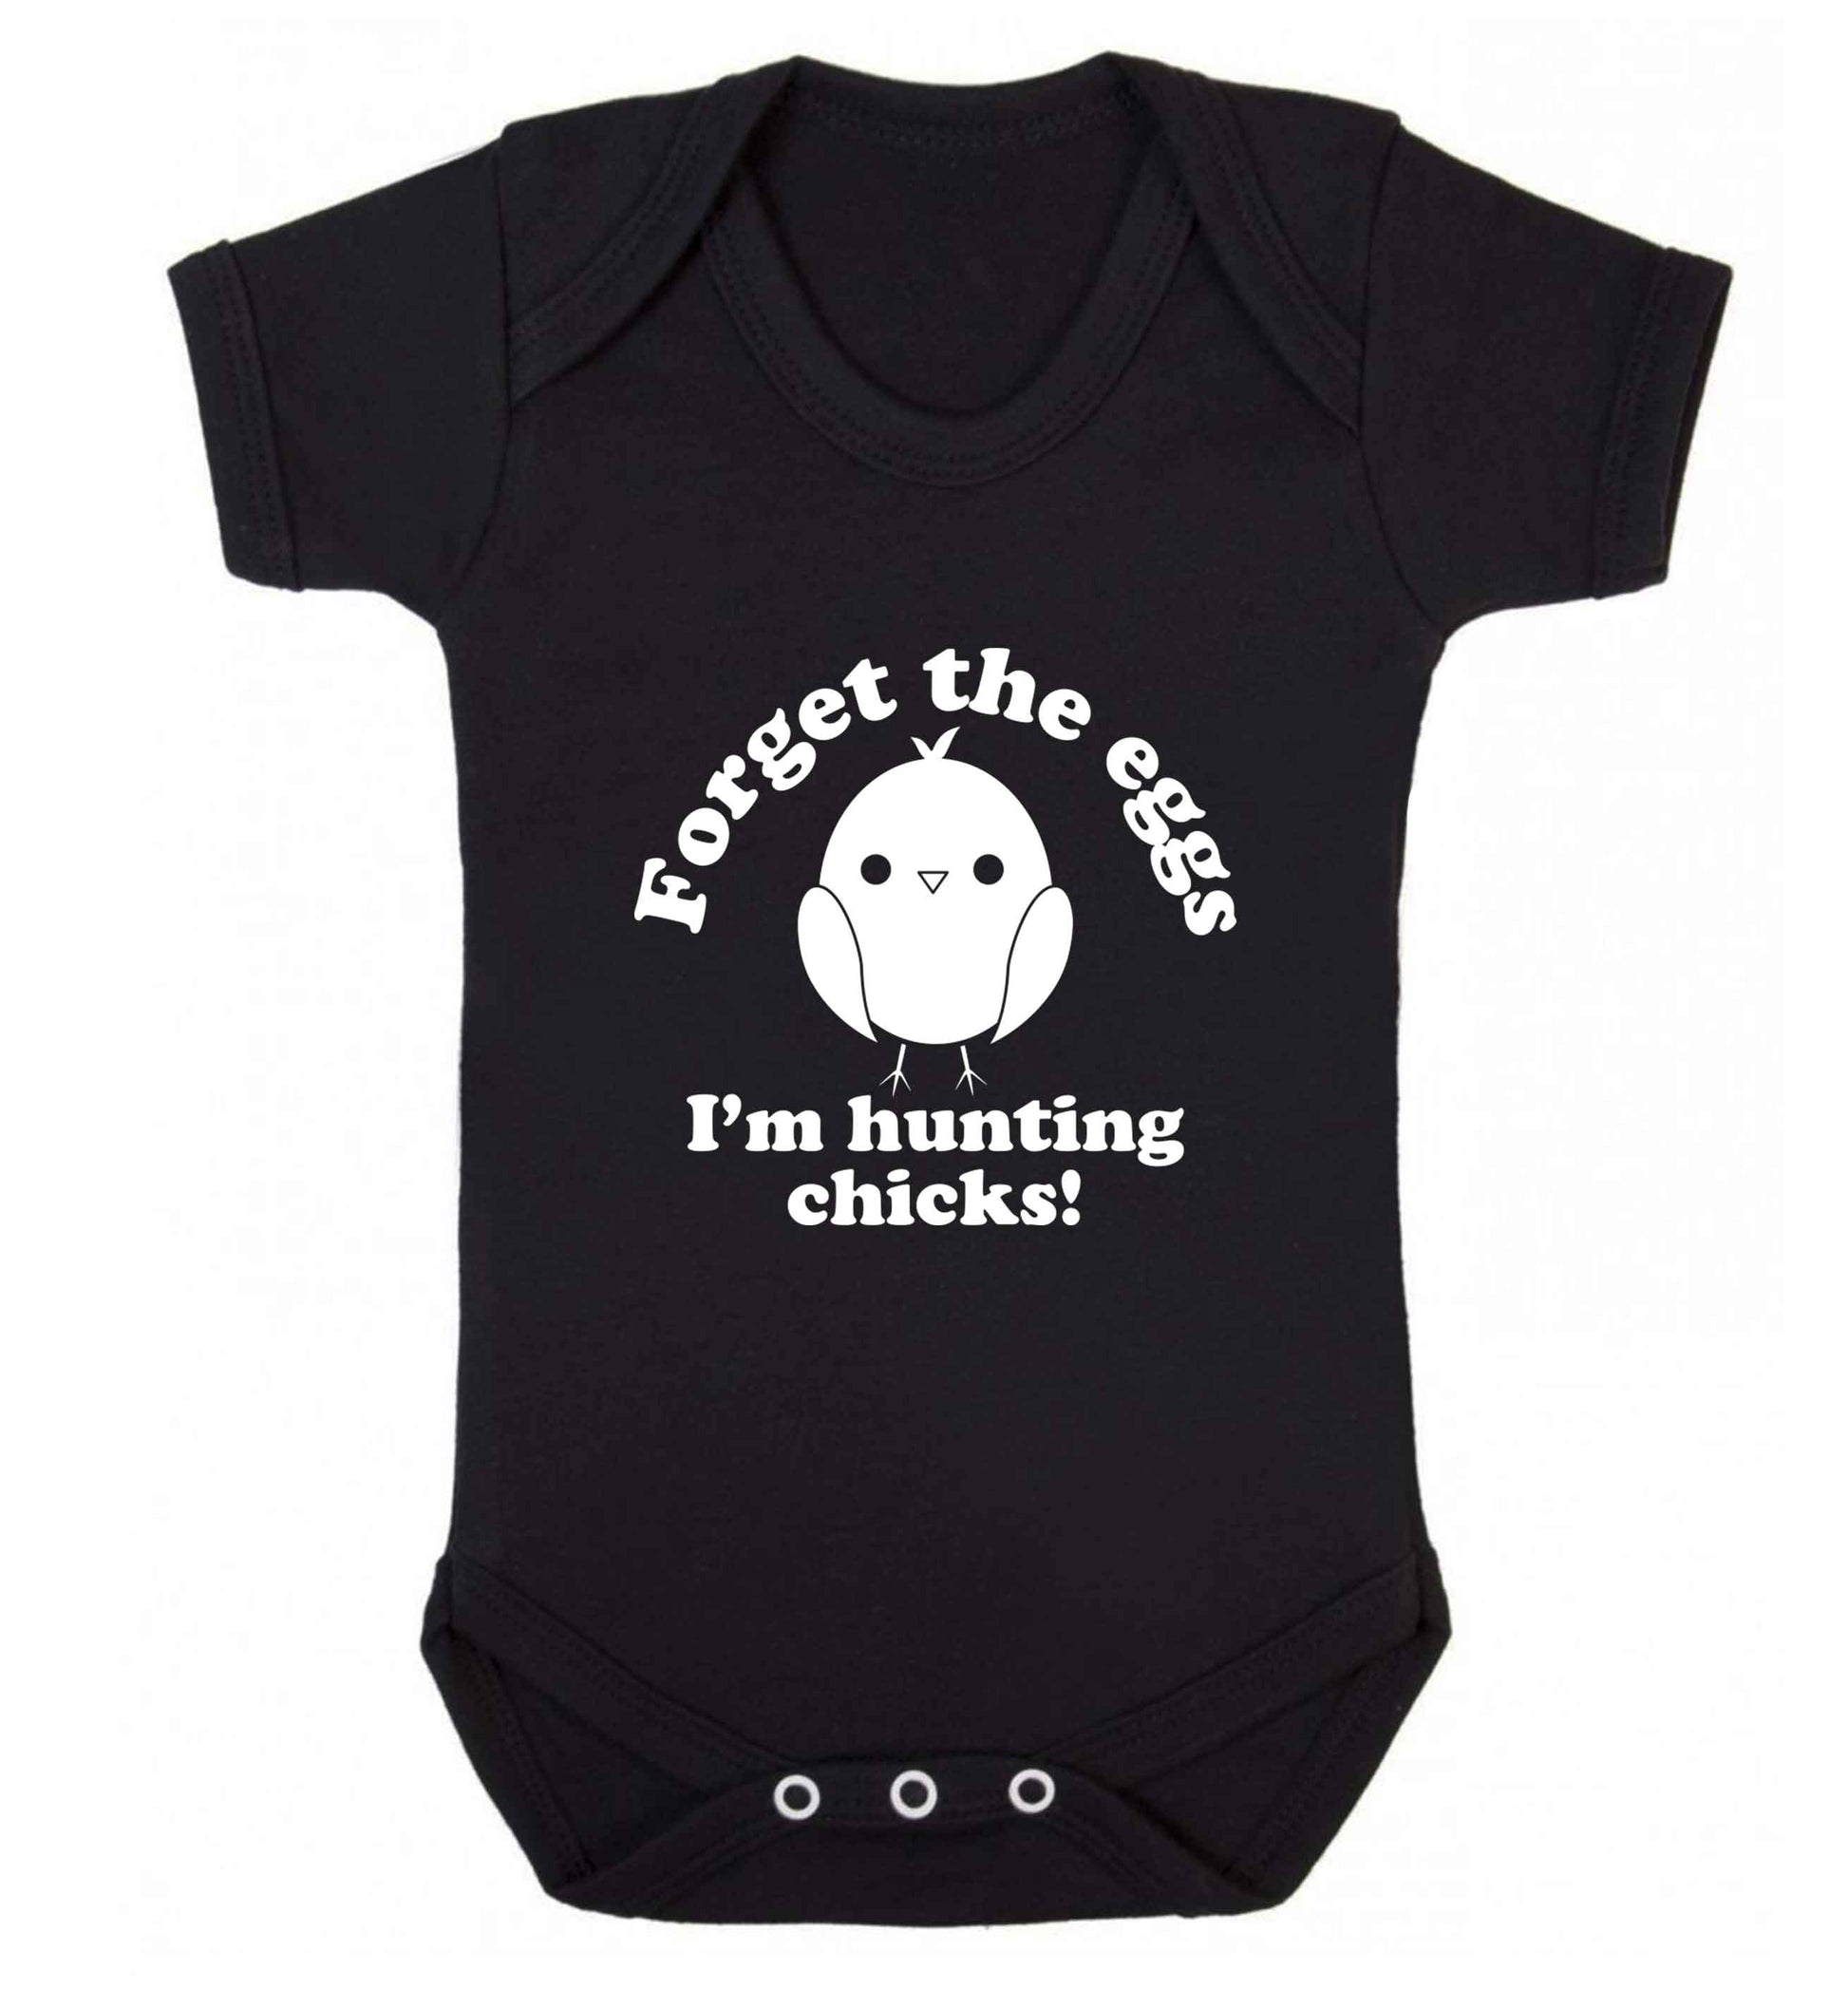 Forget the eggs I'm hunting chicks! baby vest black 18-24 months